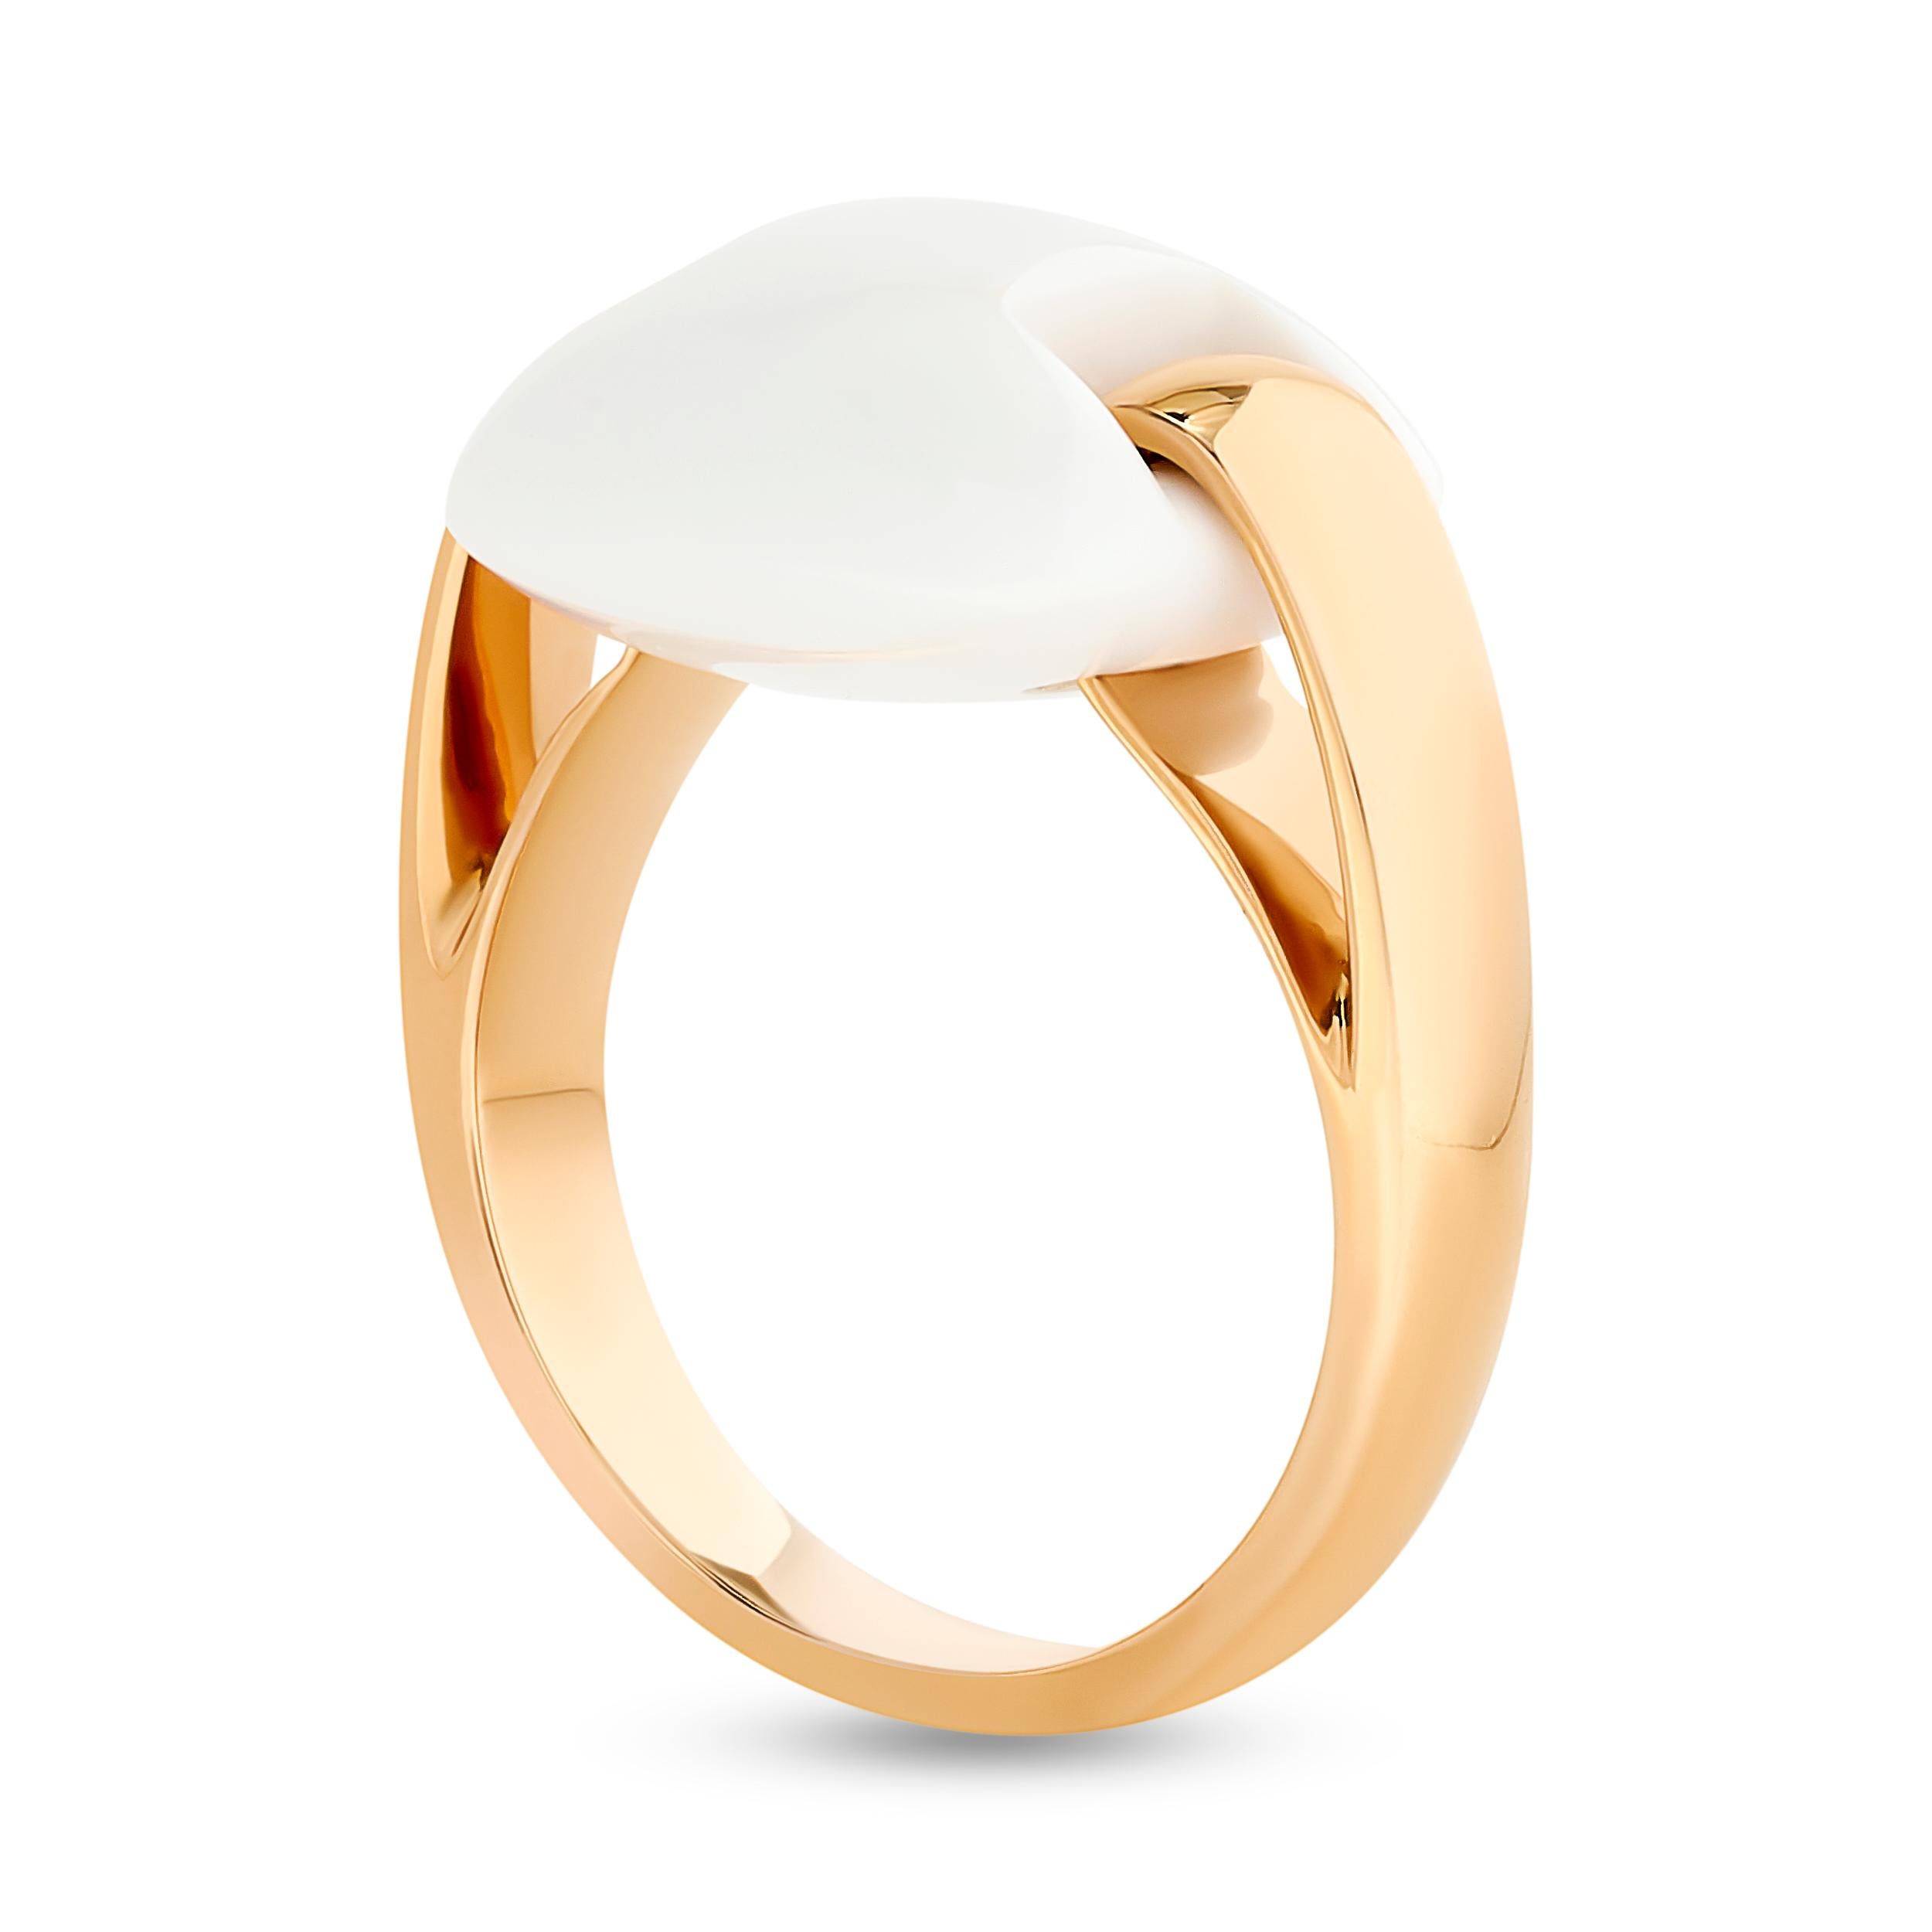 Crafted from luxurious 18k gold, the band is sleek and polished, showcasing Ferragamo's signature craftsmanship. 
The band interlocks with a white agate gemstone.

Ring size US 4.50
Signed with the Ferragamo and 18k stamps.
Ferragamo retail: $2,200